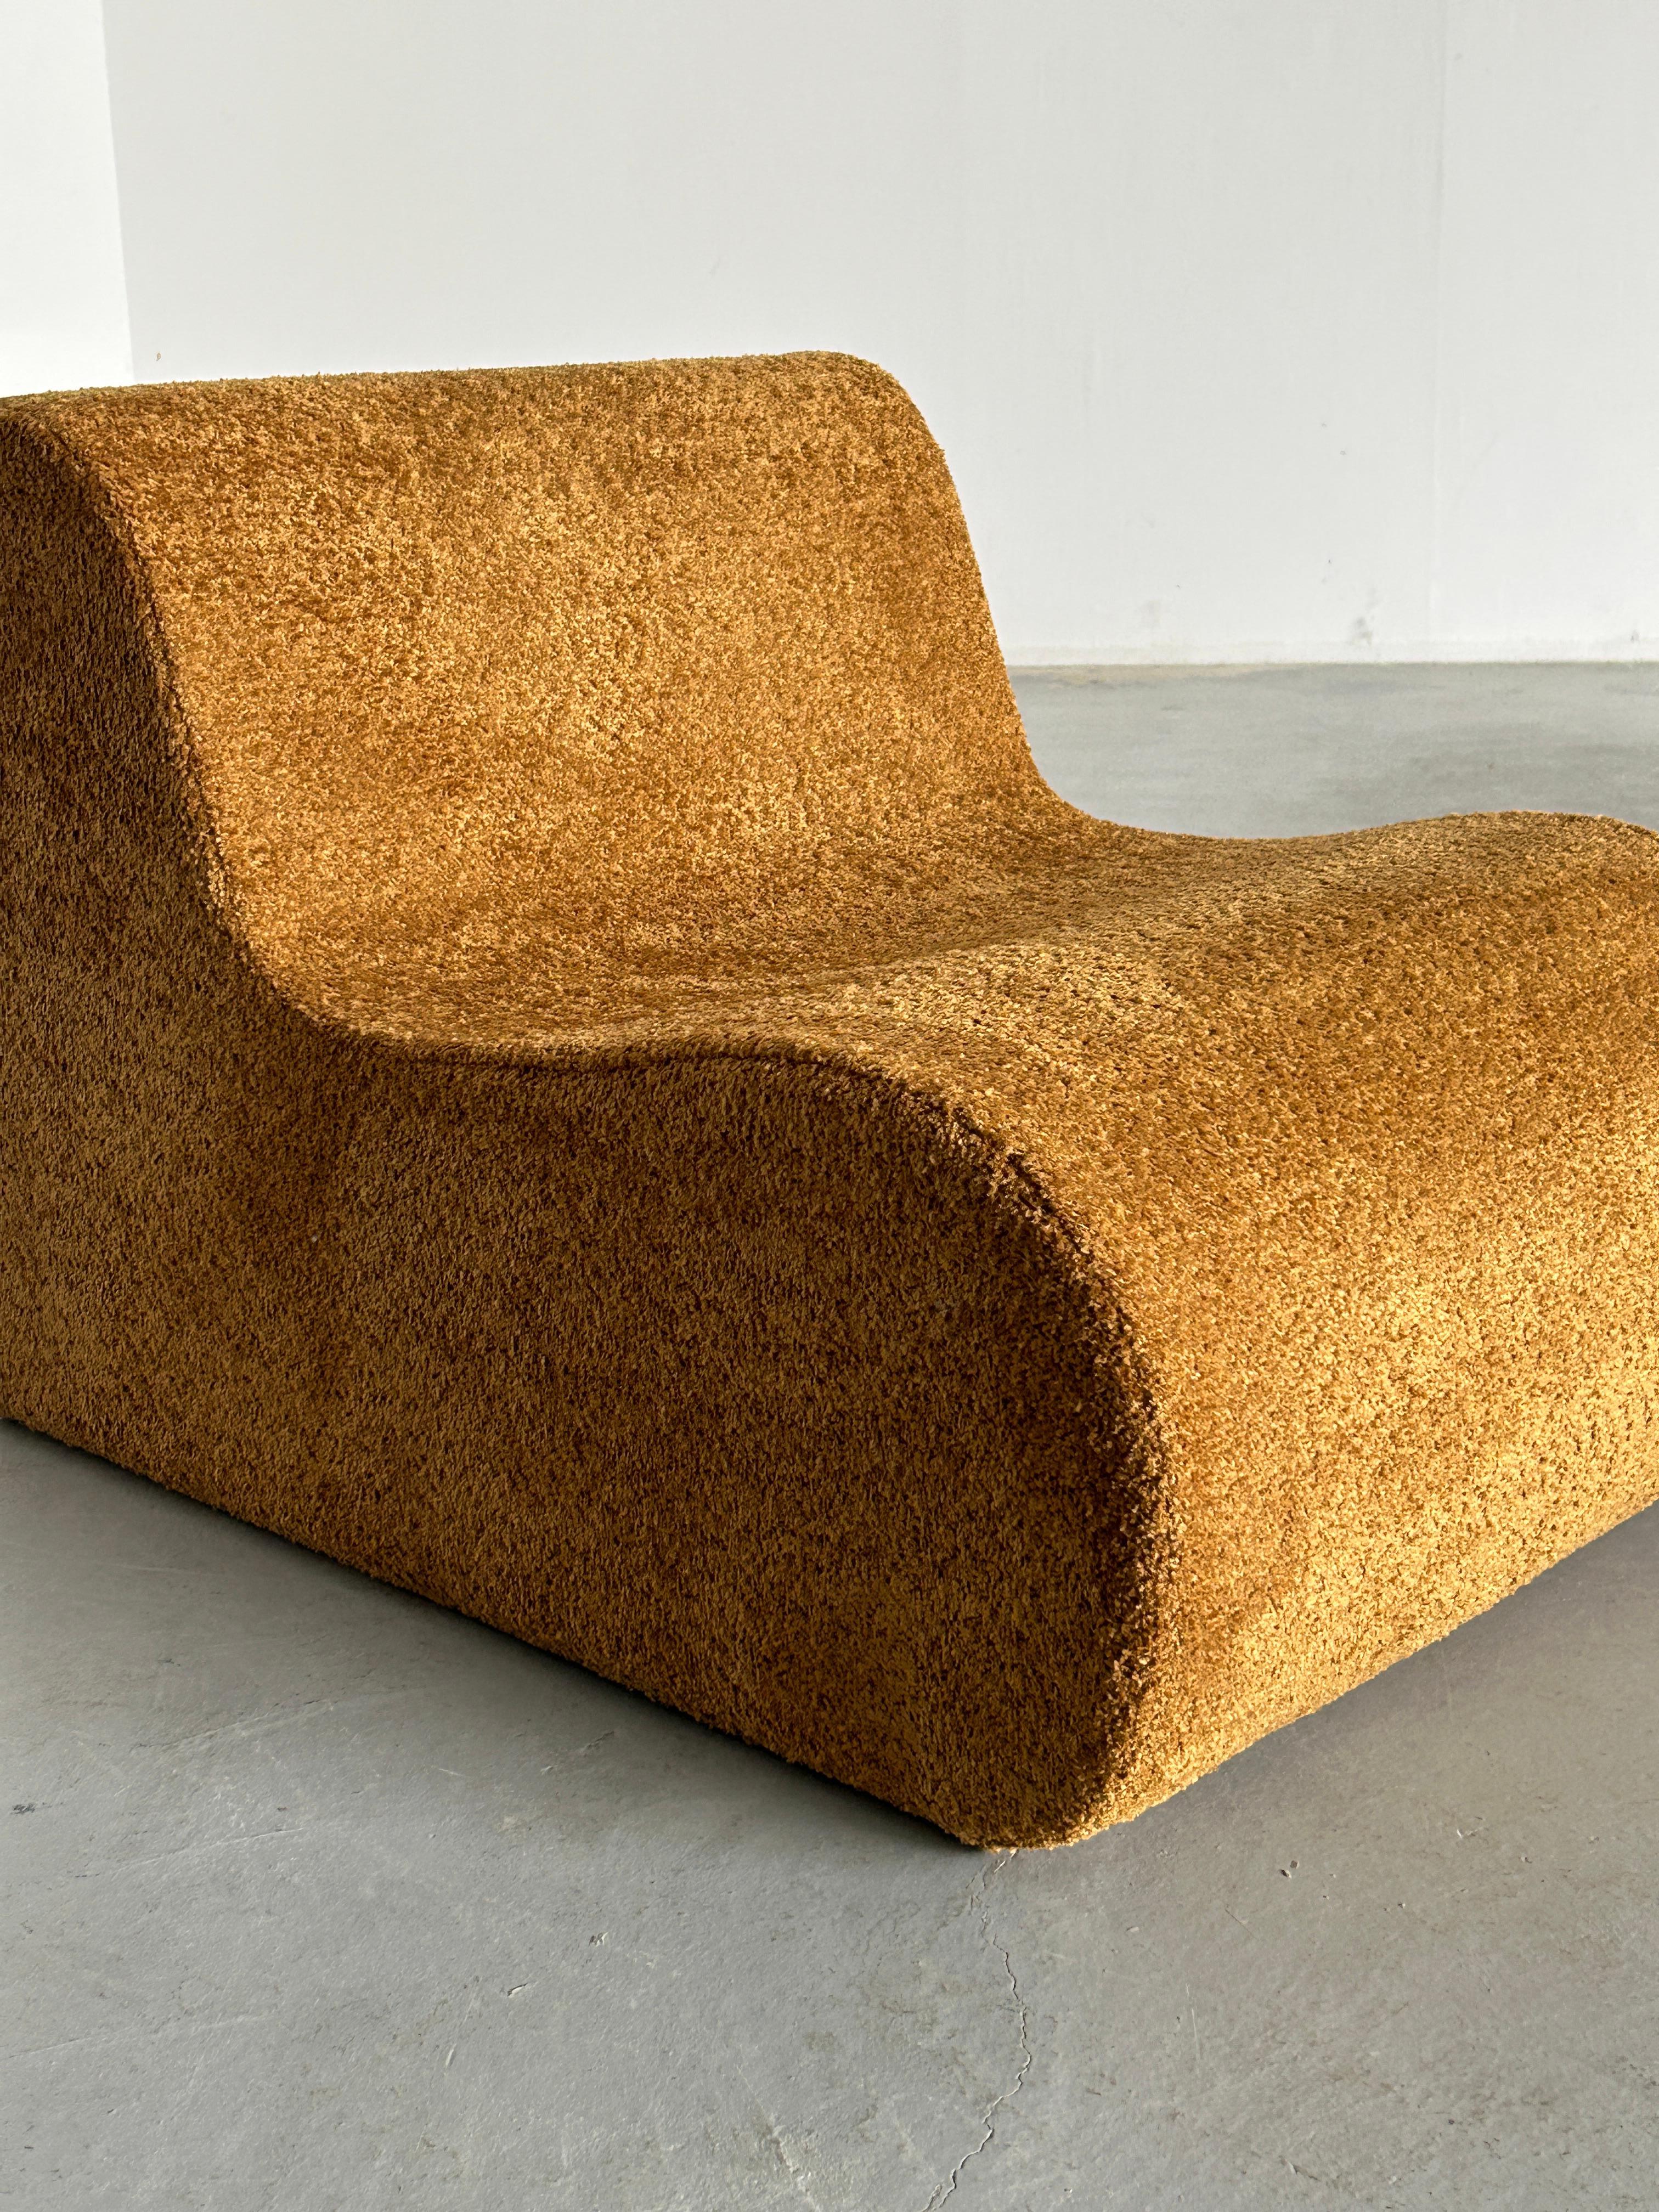 Vintage Italian Mid-Century-Modern Lounge Chair in Ochre Boucle, 1970s Italy For Sale 5